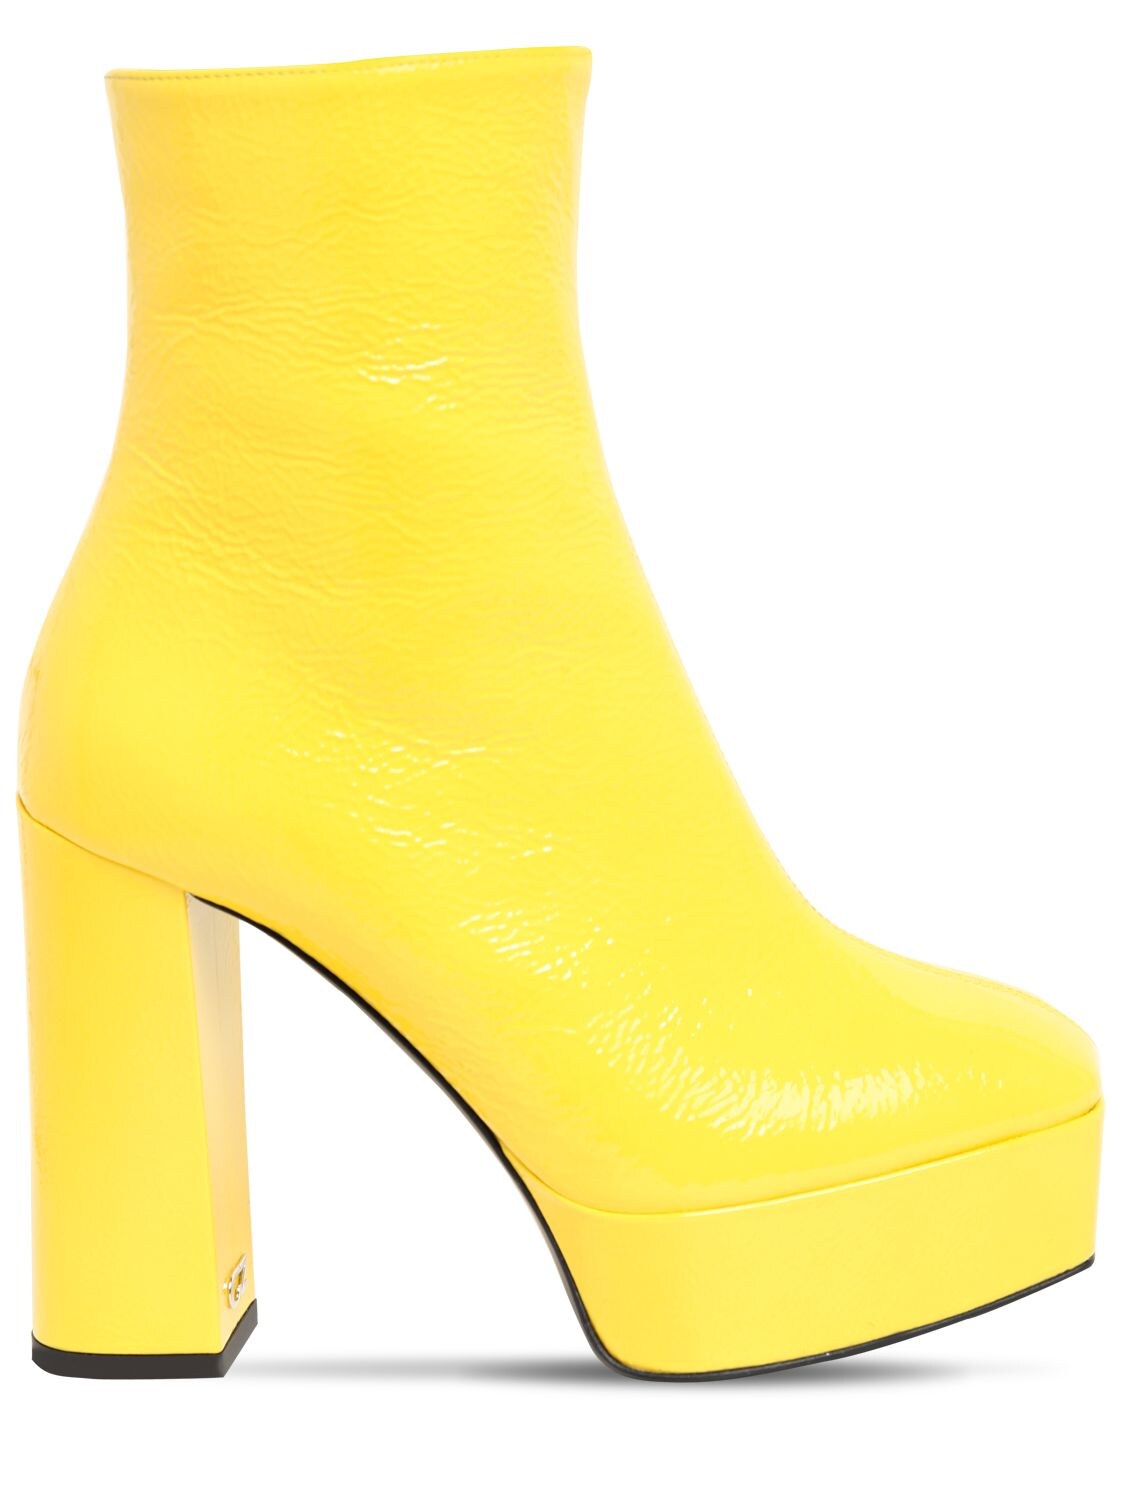 Giuseppe Zanotti 120mm Patent Leather Ankle Boots In Yellow